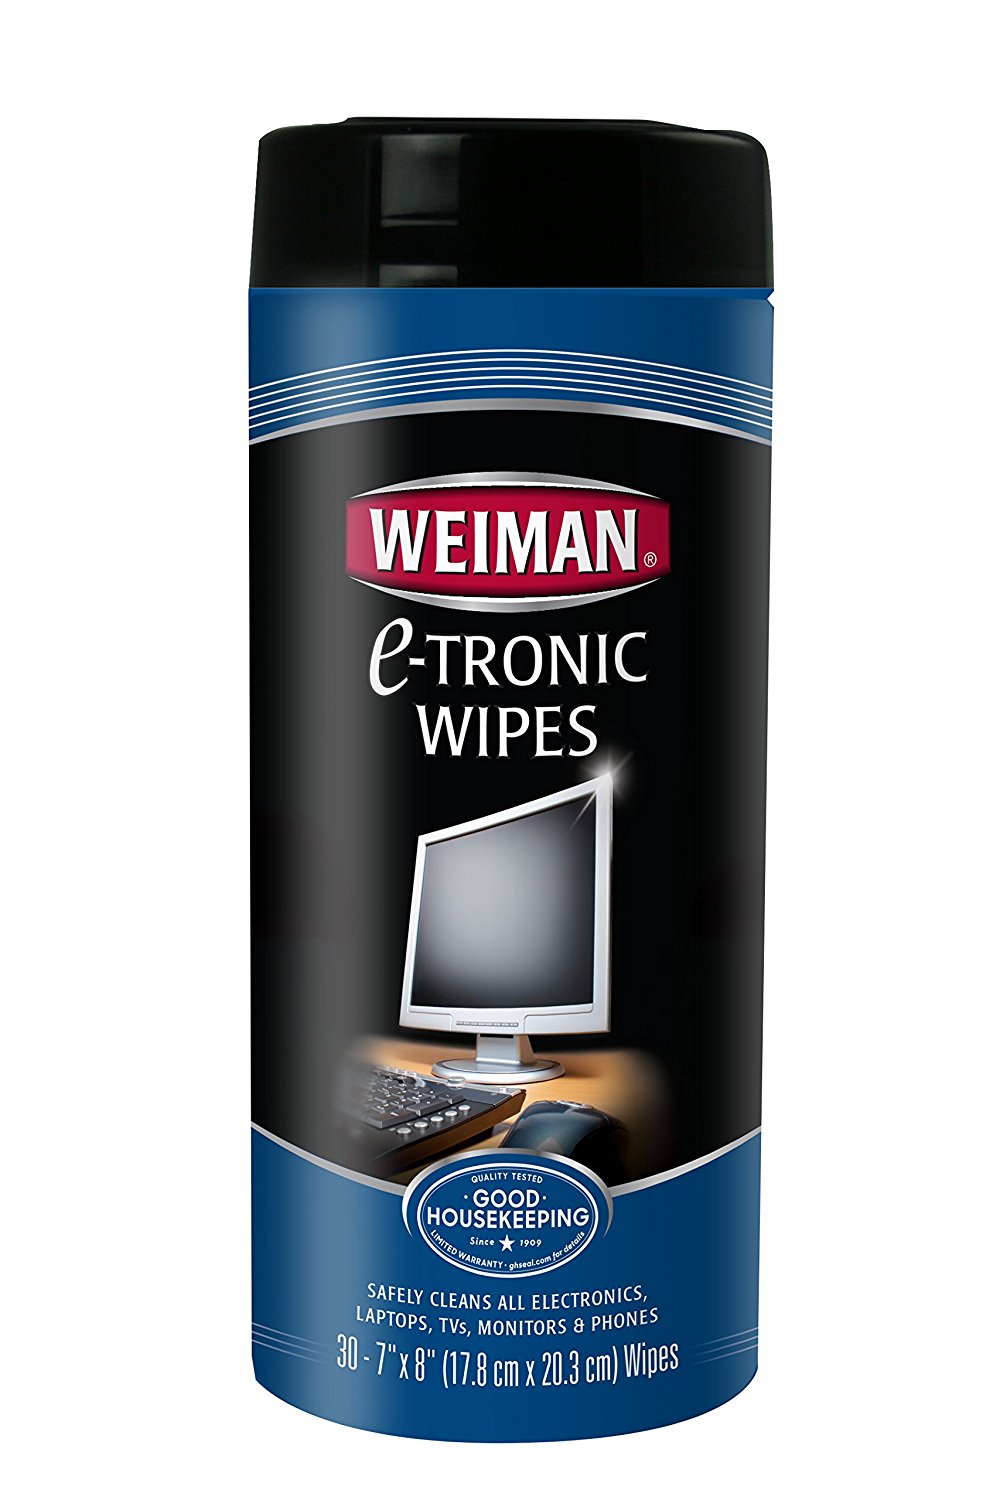 Weiman Stainless Steel Cleaner Wipes - 30 Count (3 Pack)